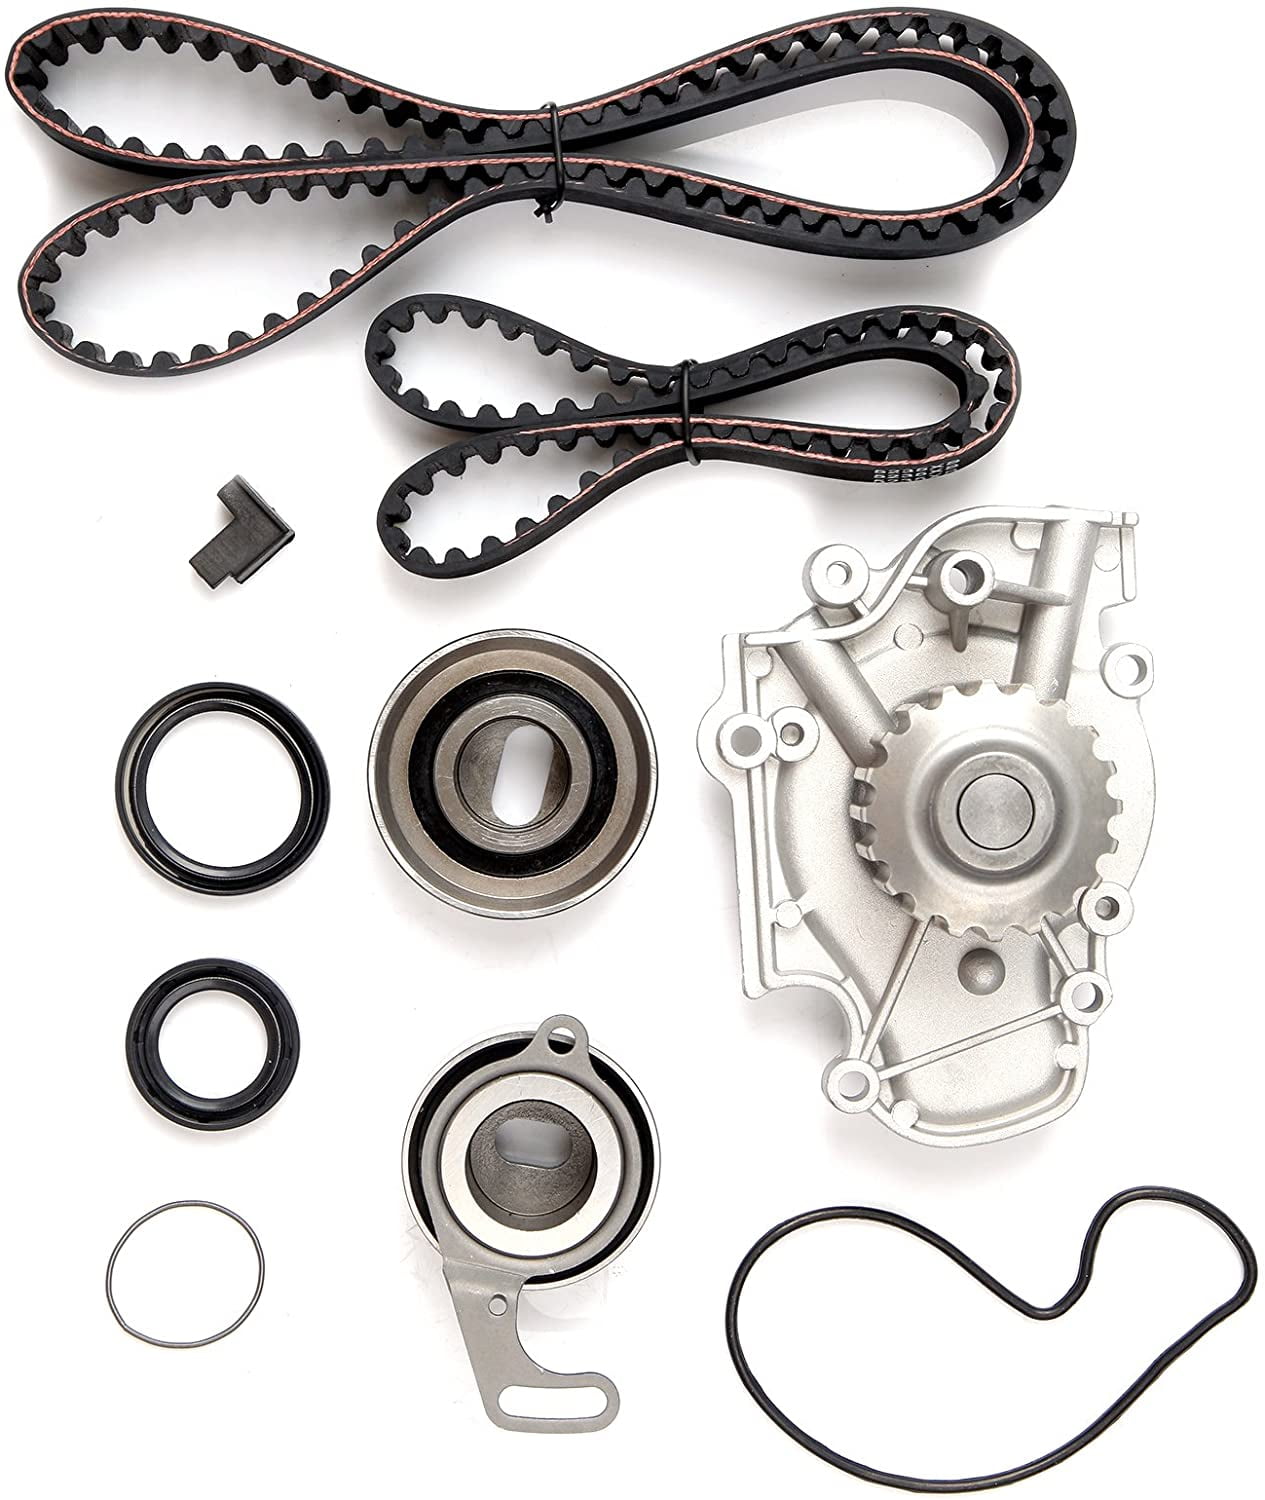 SCITOO Timing Belt Water Pump Tensioner Kit Fits 1990-1997 for Honda for  Accord 1995-1997 for Honda Odyssey 1992-1996 for Honda Prelude 1996-1997  for Isuzu Oasis